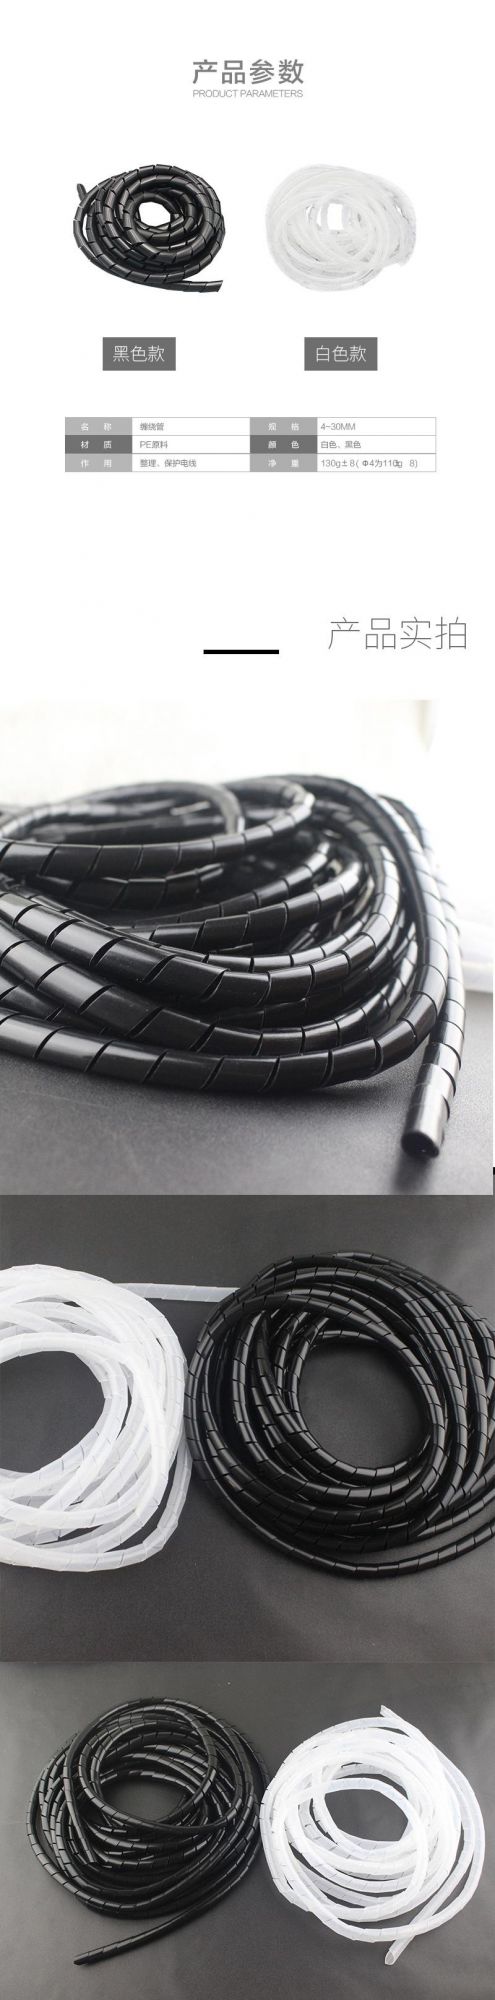 8mm (Wrapping Range: 6mm-60mm) Spiral Cable Wrap Spiral Wire Wrap Cord